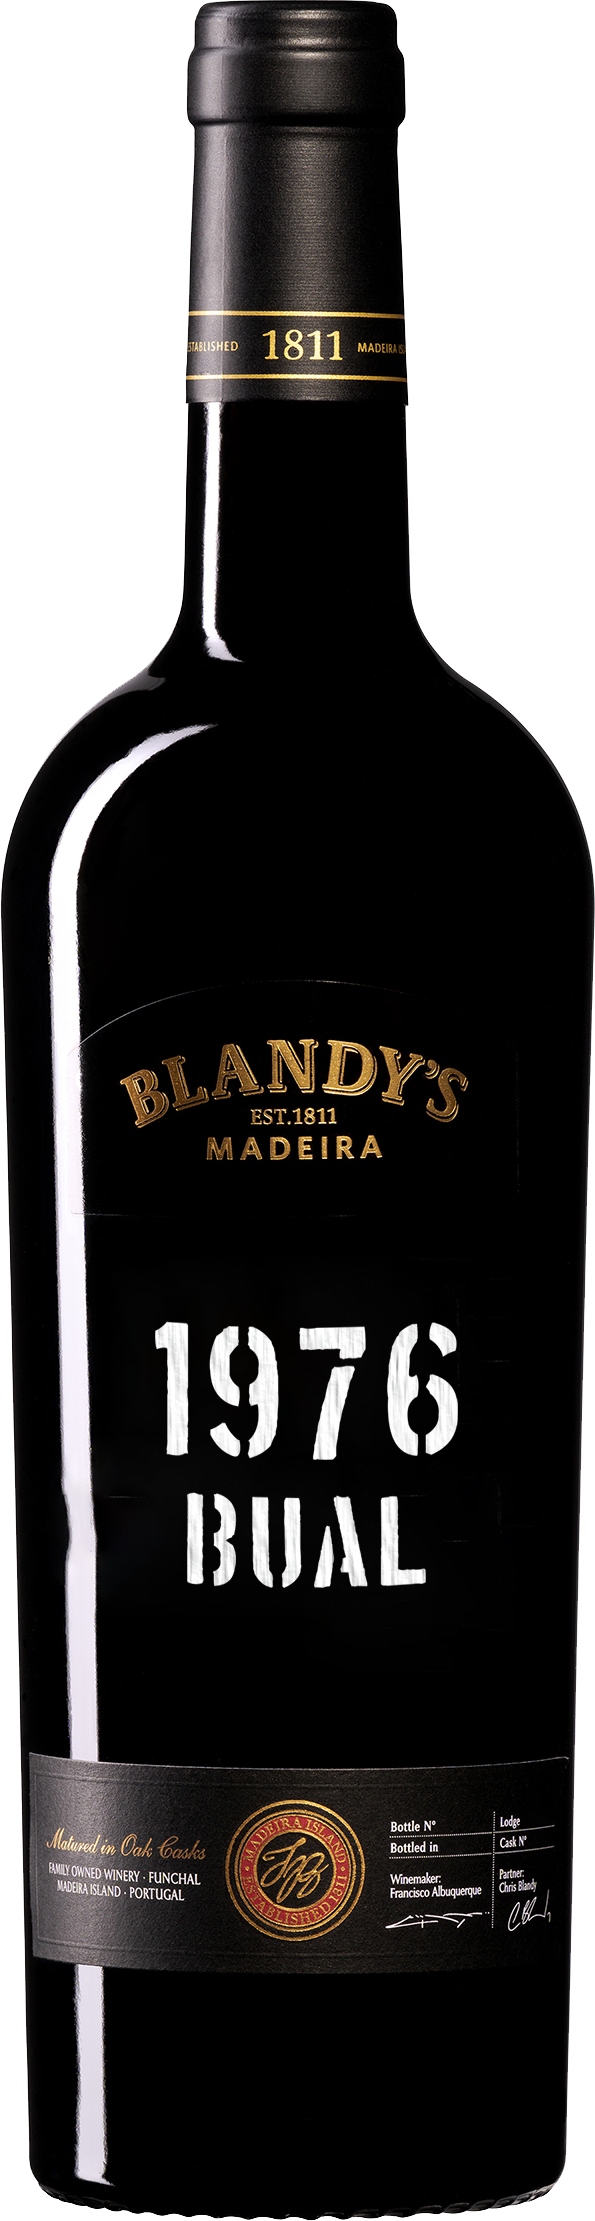 Product Image for BLANDY'S VINTAGE BUAL 1976 - MAGNUM (1.5L)